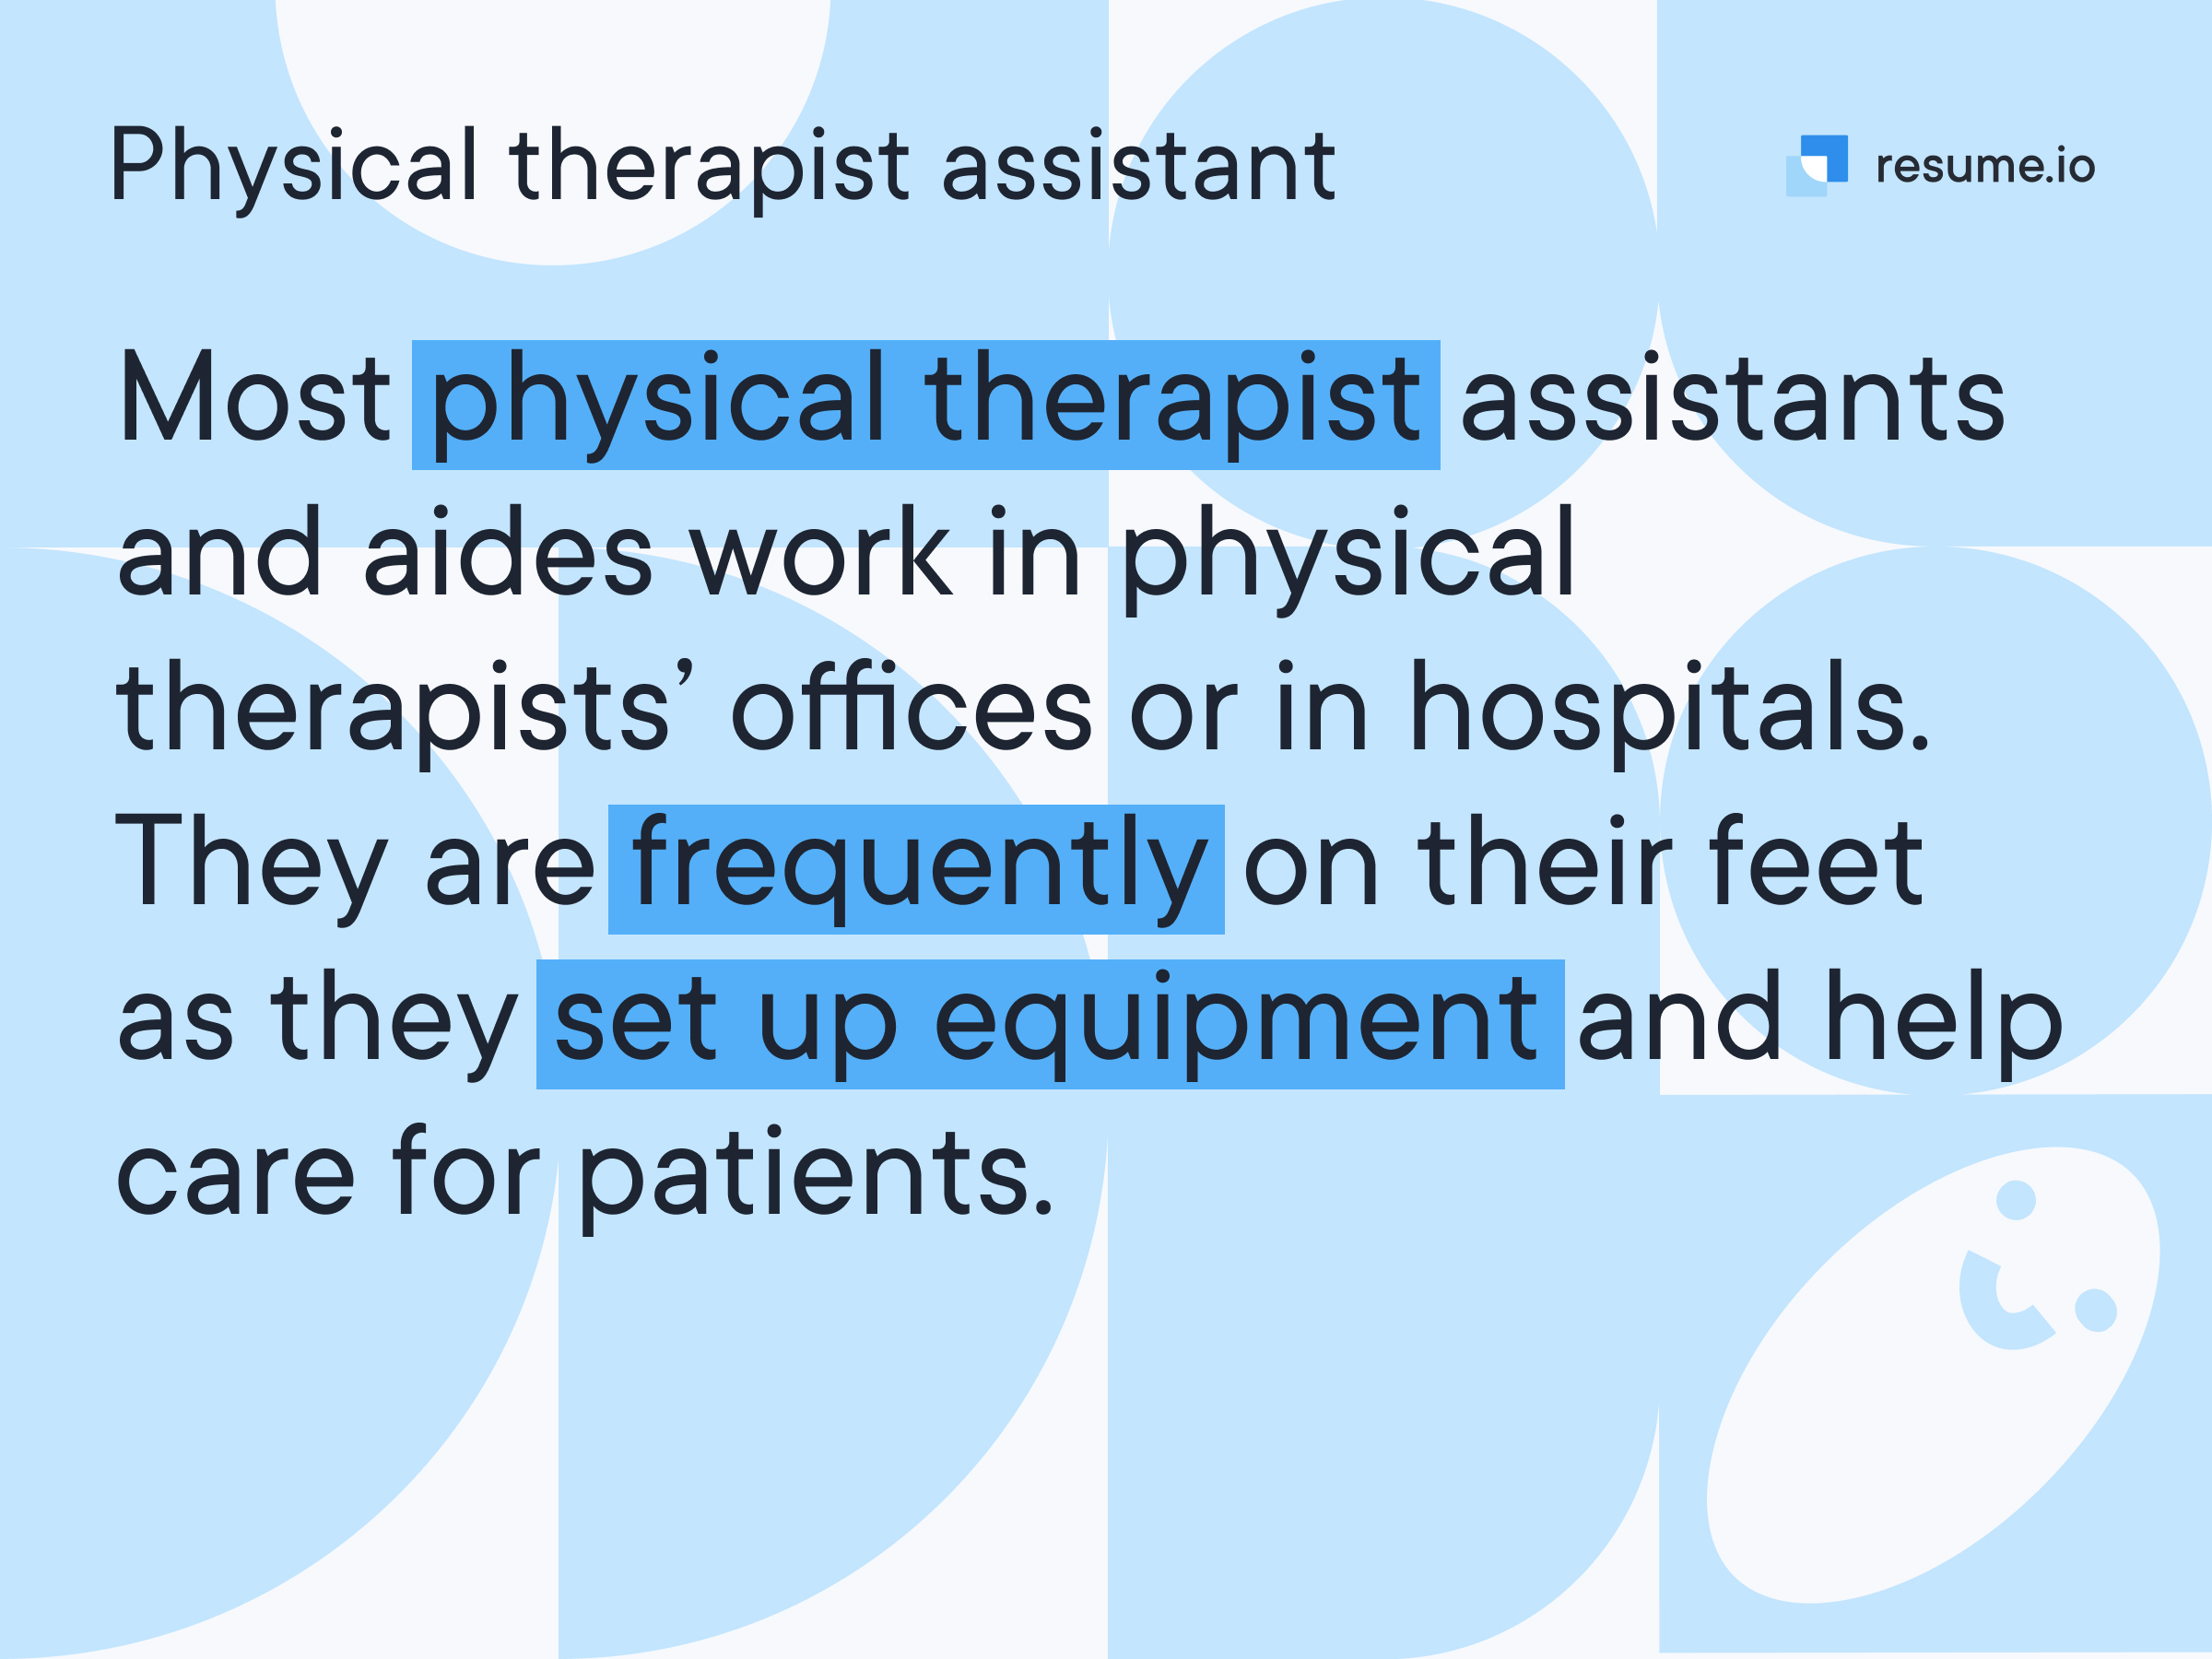 Most physical therapist assistants work in physical therapists' offices or hospitals